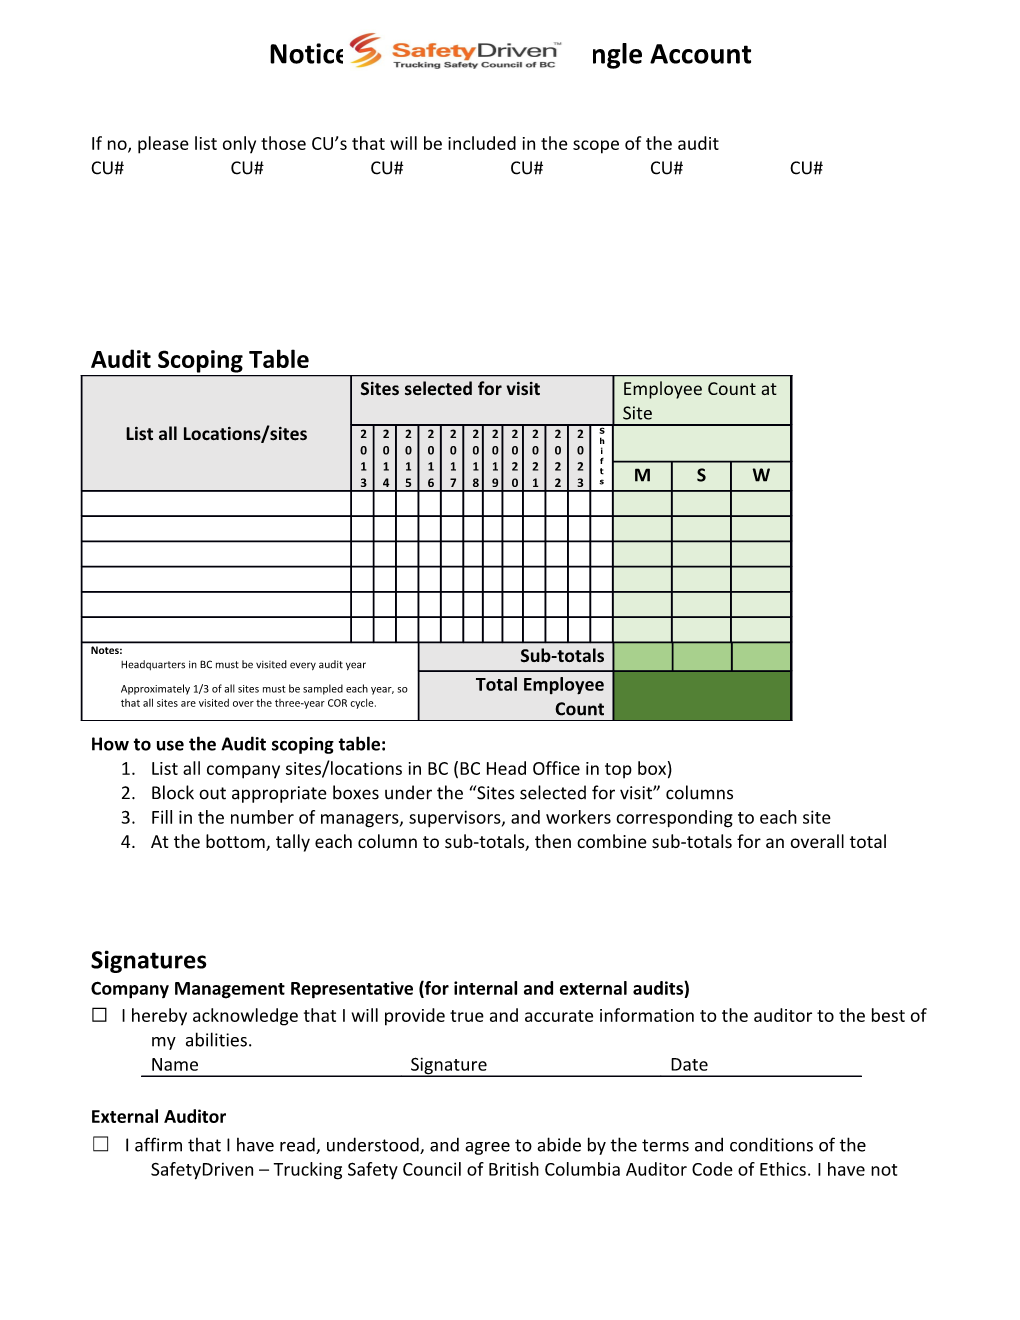 How to Use the Audit Scoping Table